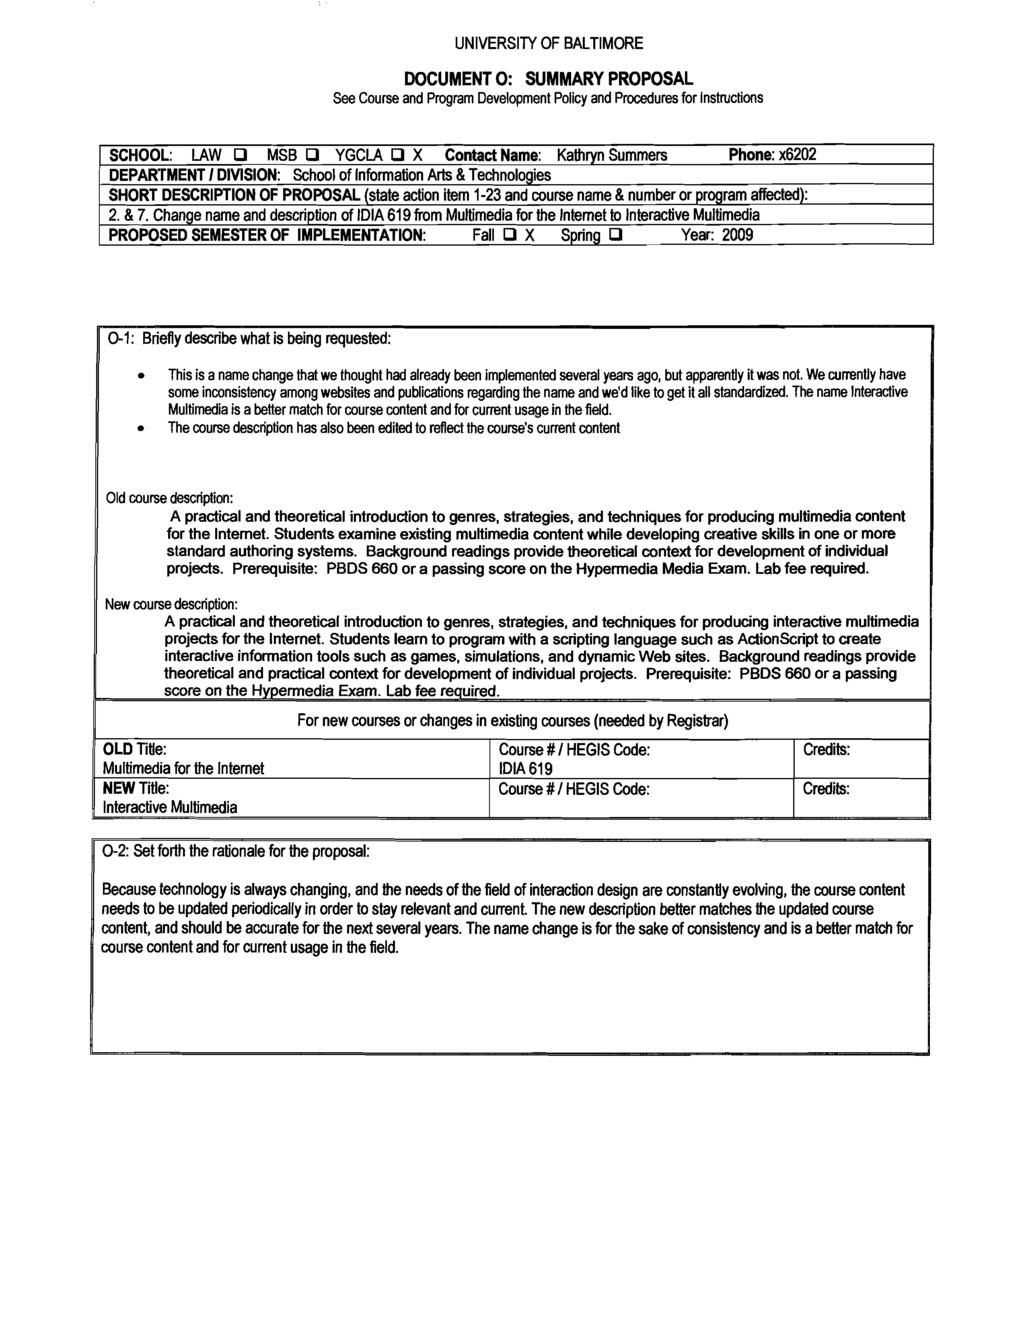 UNIVERSITY OFBALTIMORE DOCUMENT 0: SUMMARY PROPOSAL See Course and Program Development Policy and Procedures forinstructions SCHOOL: LAW [J MSB [J YGCLA [J X ContactName: Kathryn Summers Phone: x6202